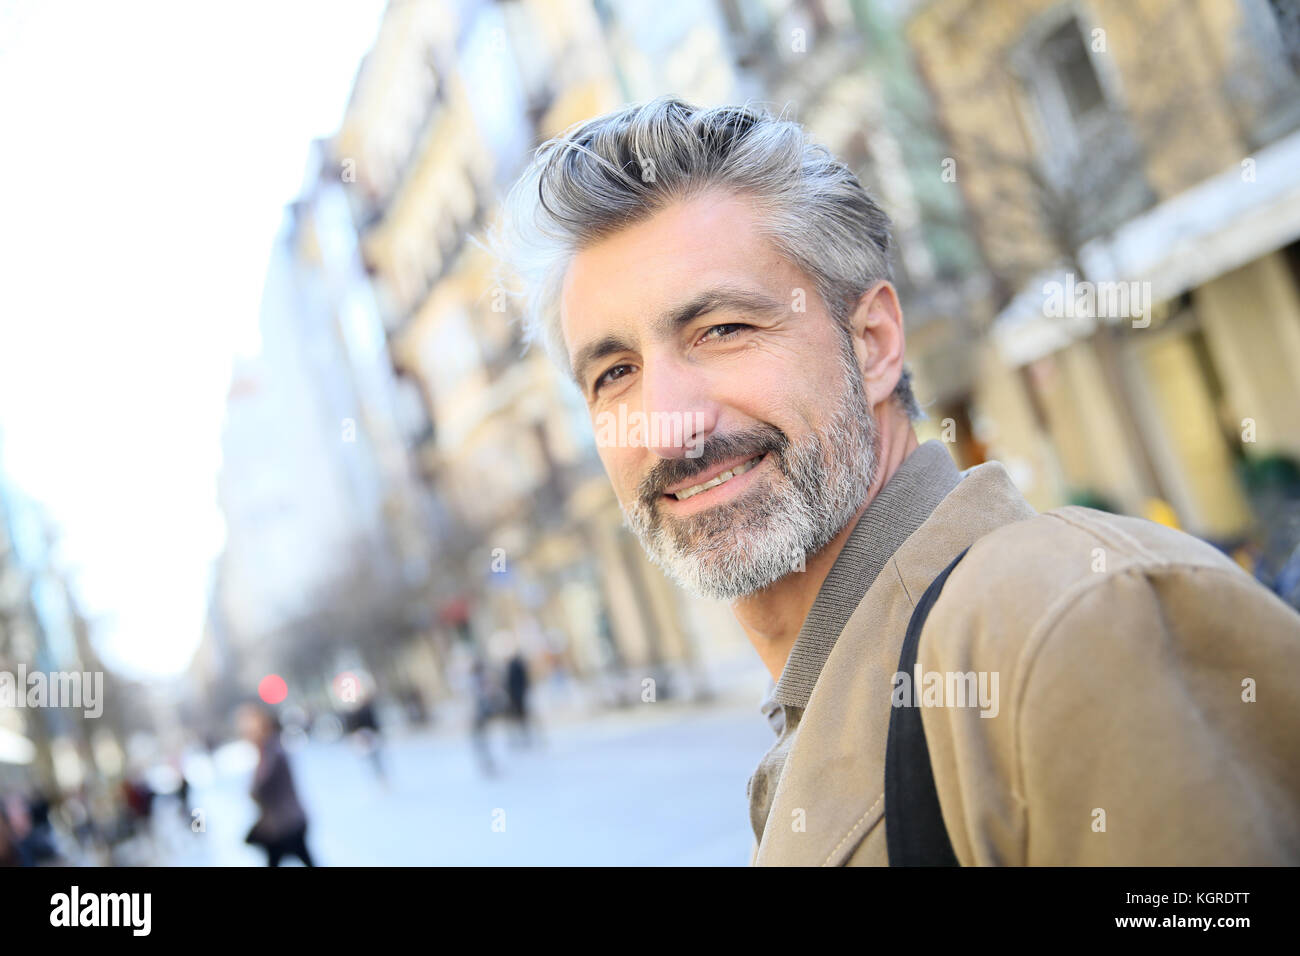 Handsome mature man walking in town Stock Photo